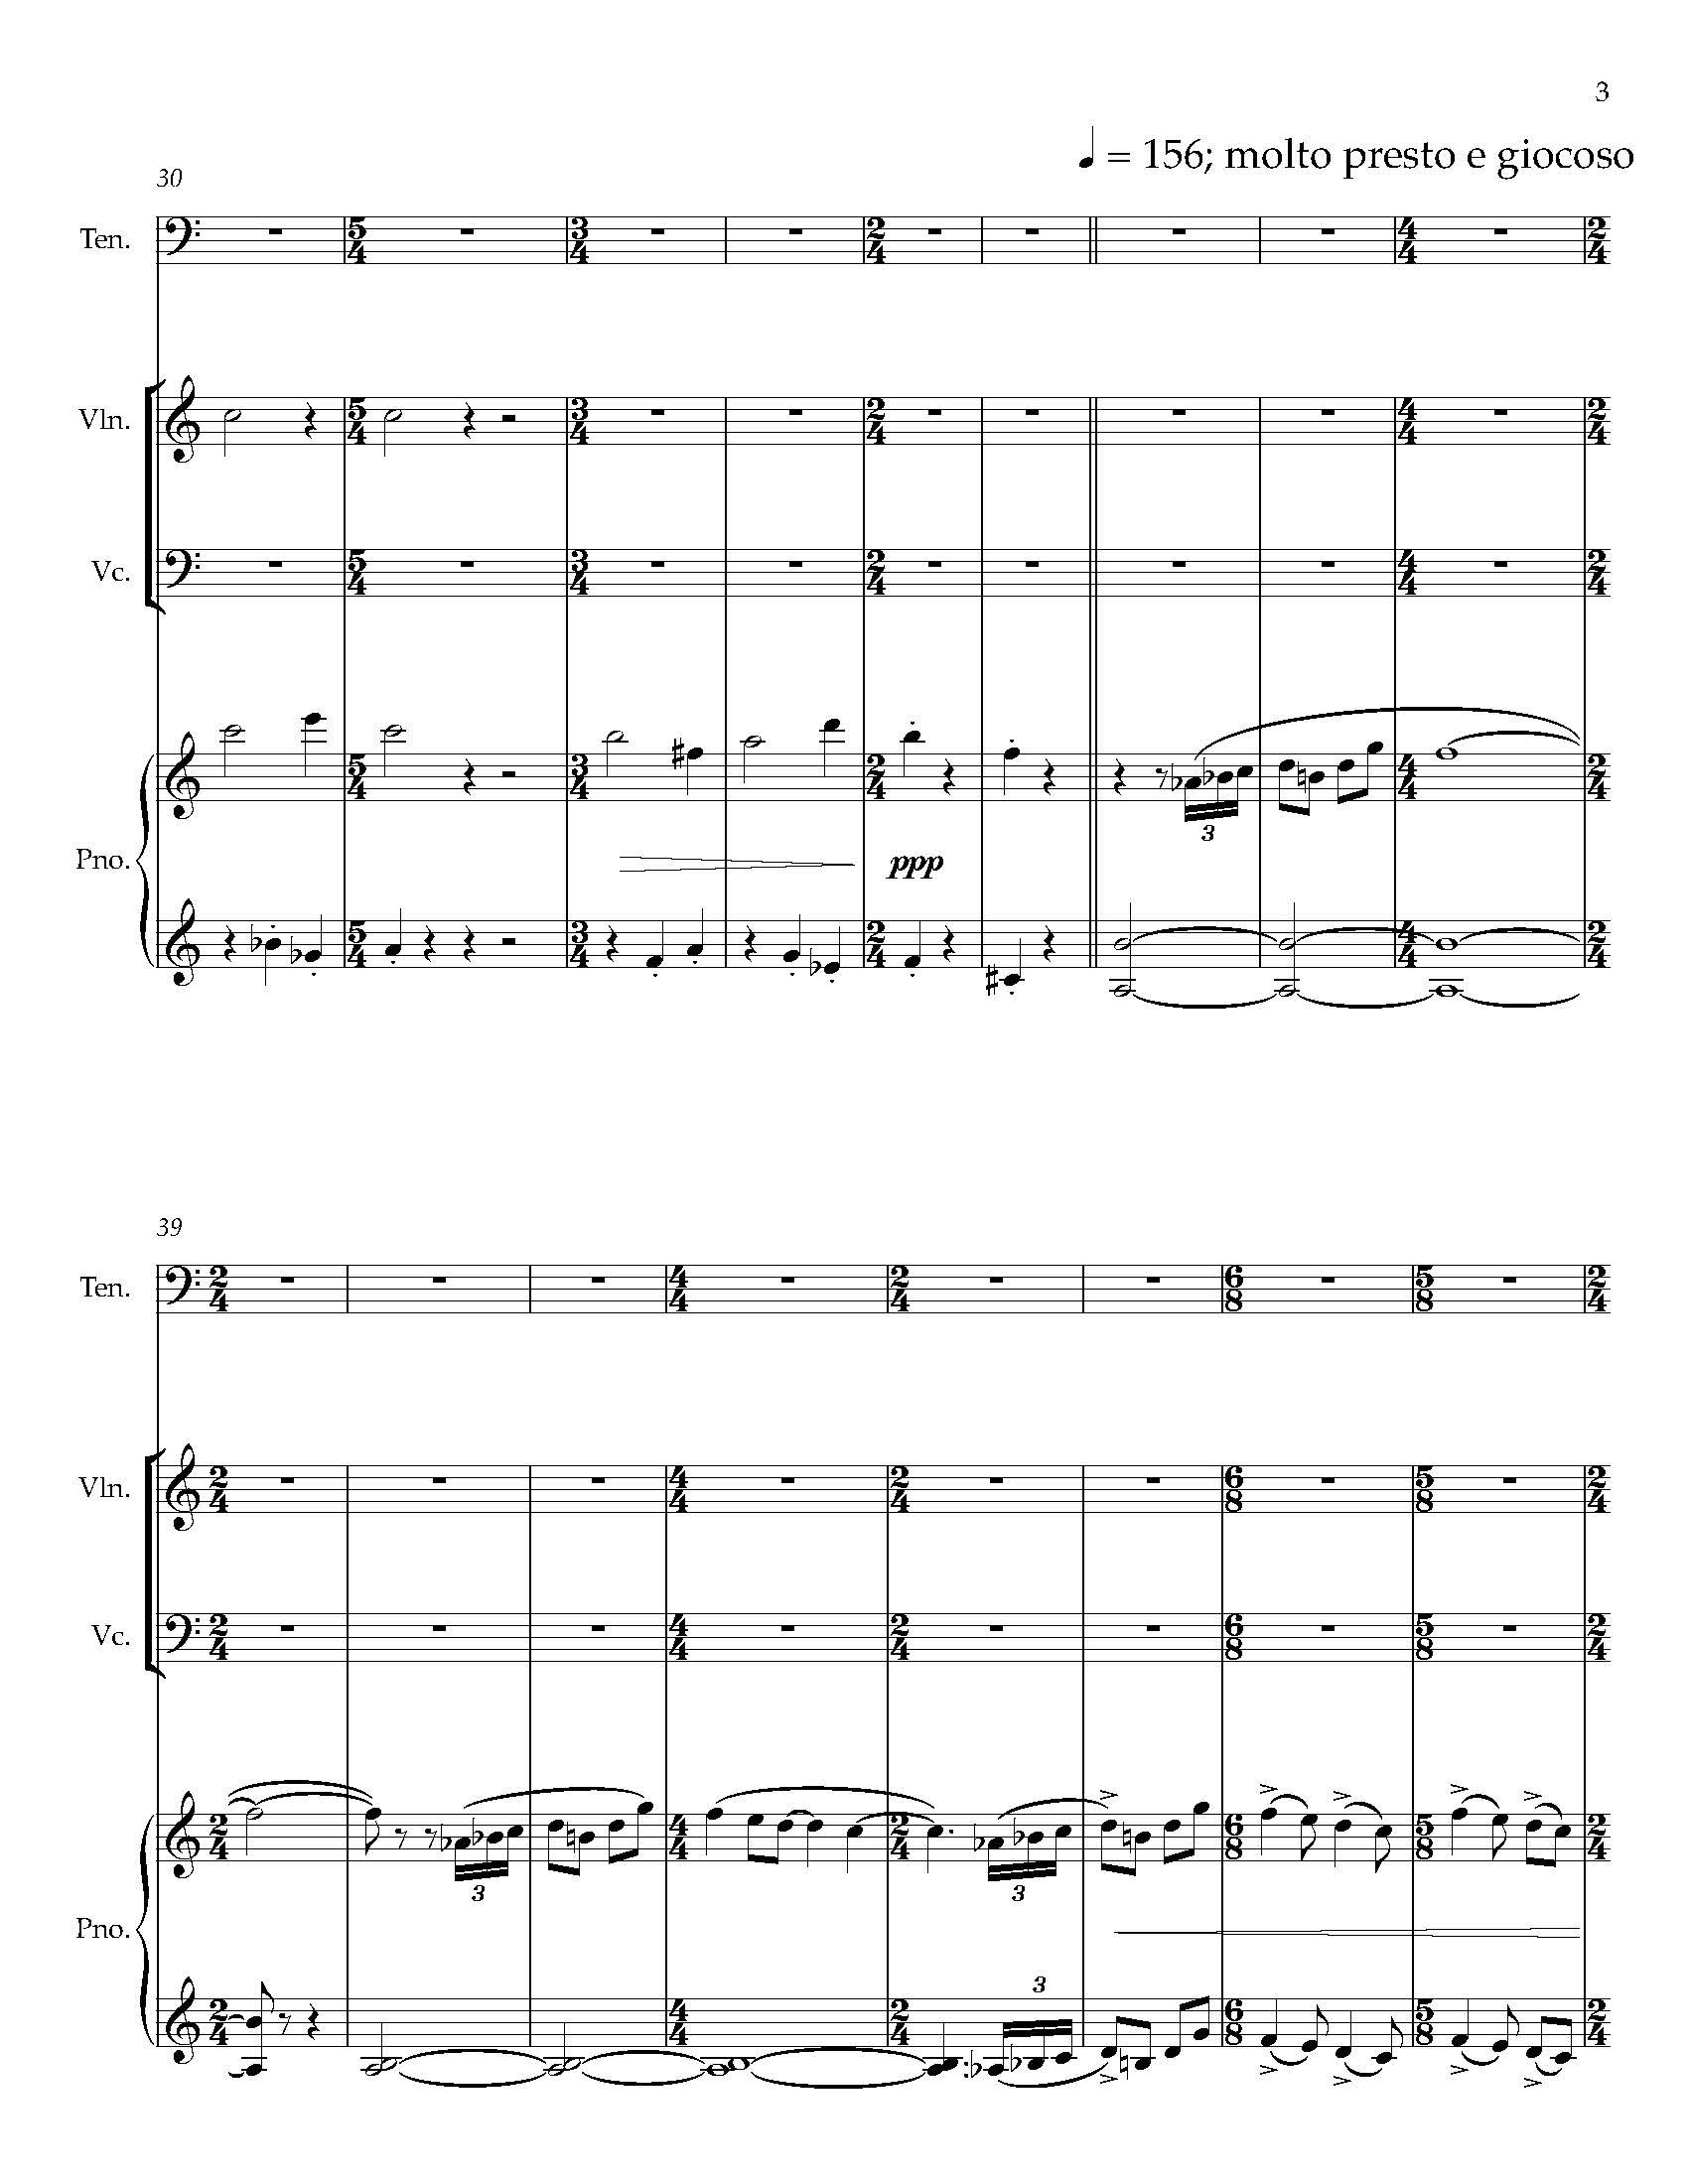 Gursky Songs - Complete Score_Page_11.jpg